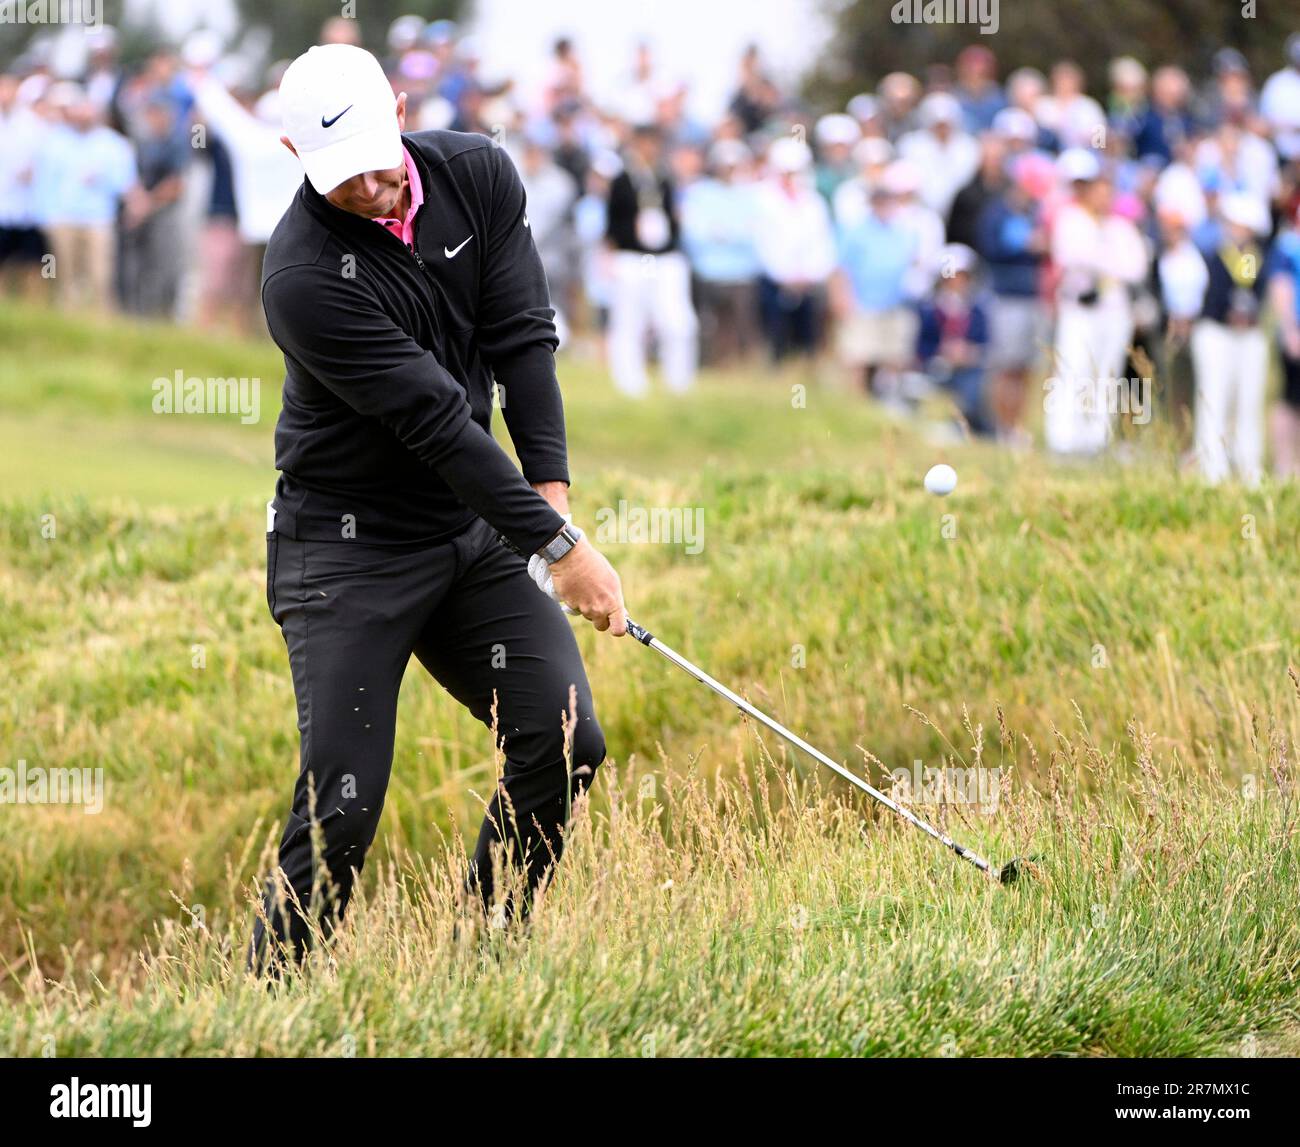 Los Angeles, United States. 16th June, 2023. Rory McElroy of Northern Ireland chips out of the rough on the 11th hole during the second round of the 2023 U.S. Open at the Los Angeles Country Club in Los Angeles on Friday, June 16, 2023. Photo by Alex Gallardo/UPI Credit: UPI/Alamy Live News Stock Photo